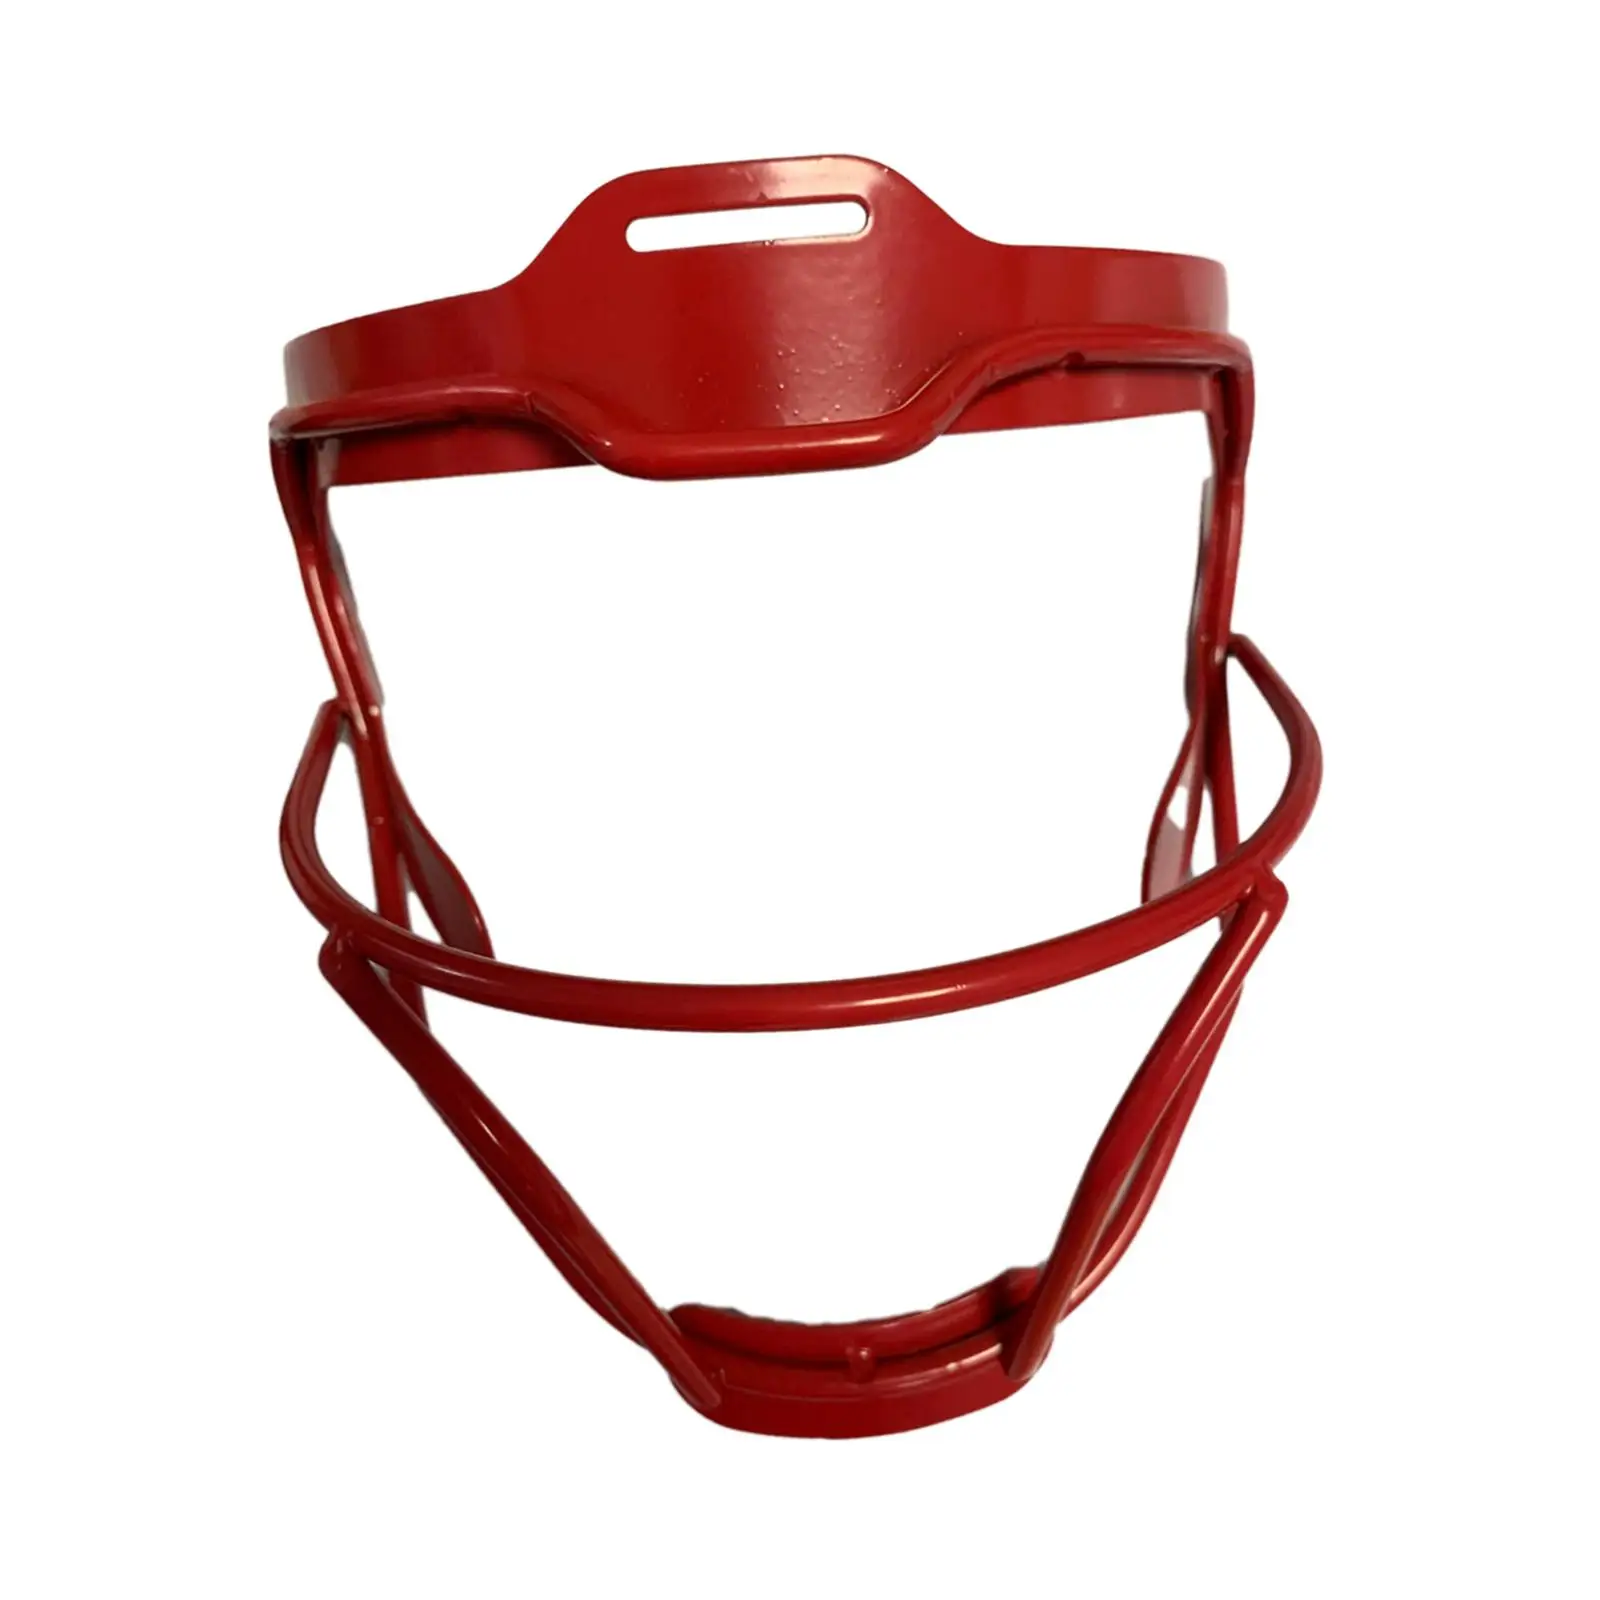 Universal Softball Batting Mask Face Guards Iron Wire Protective Shield for Women Men Protection Outdoor Safety Junior